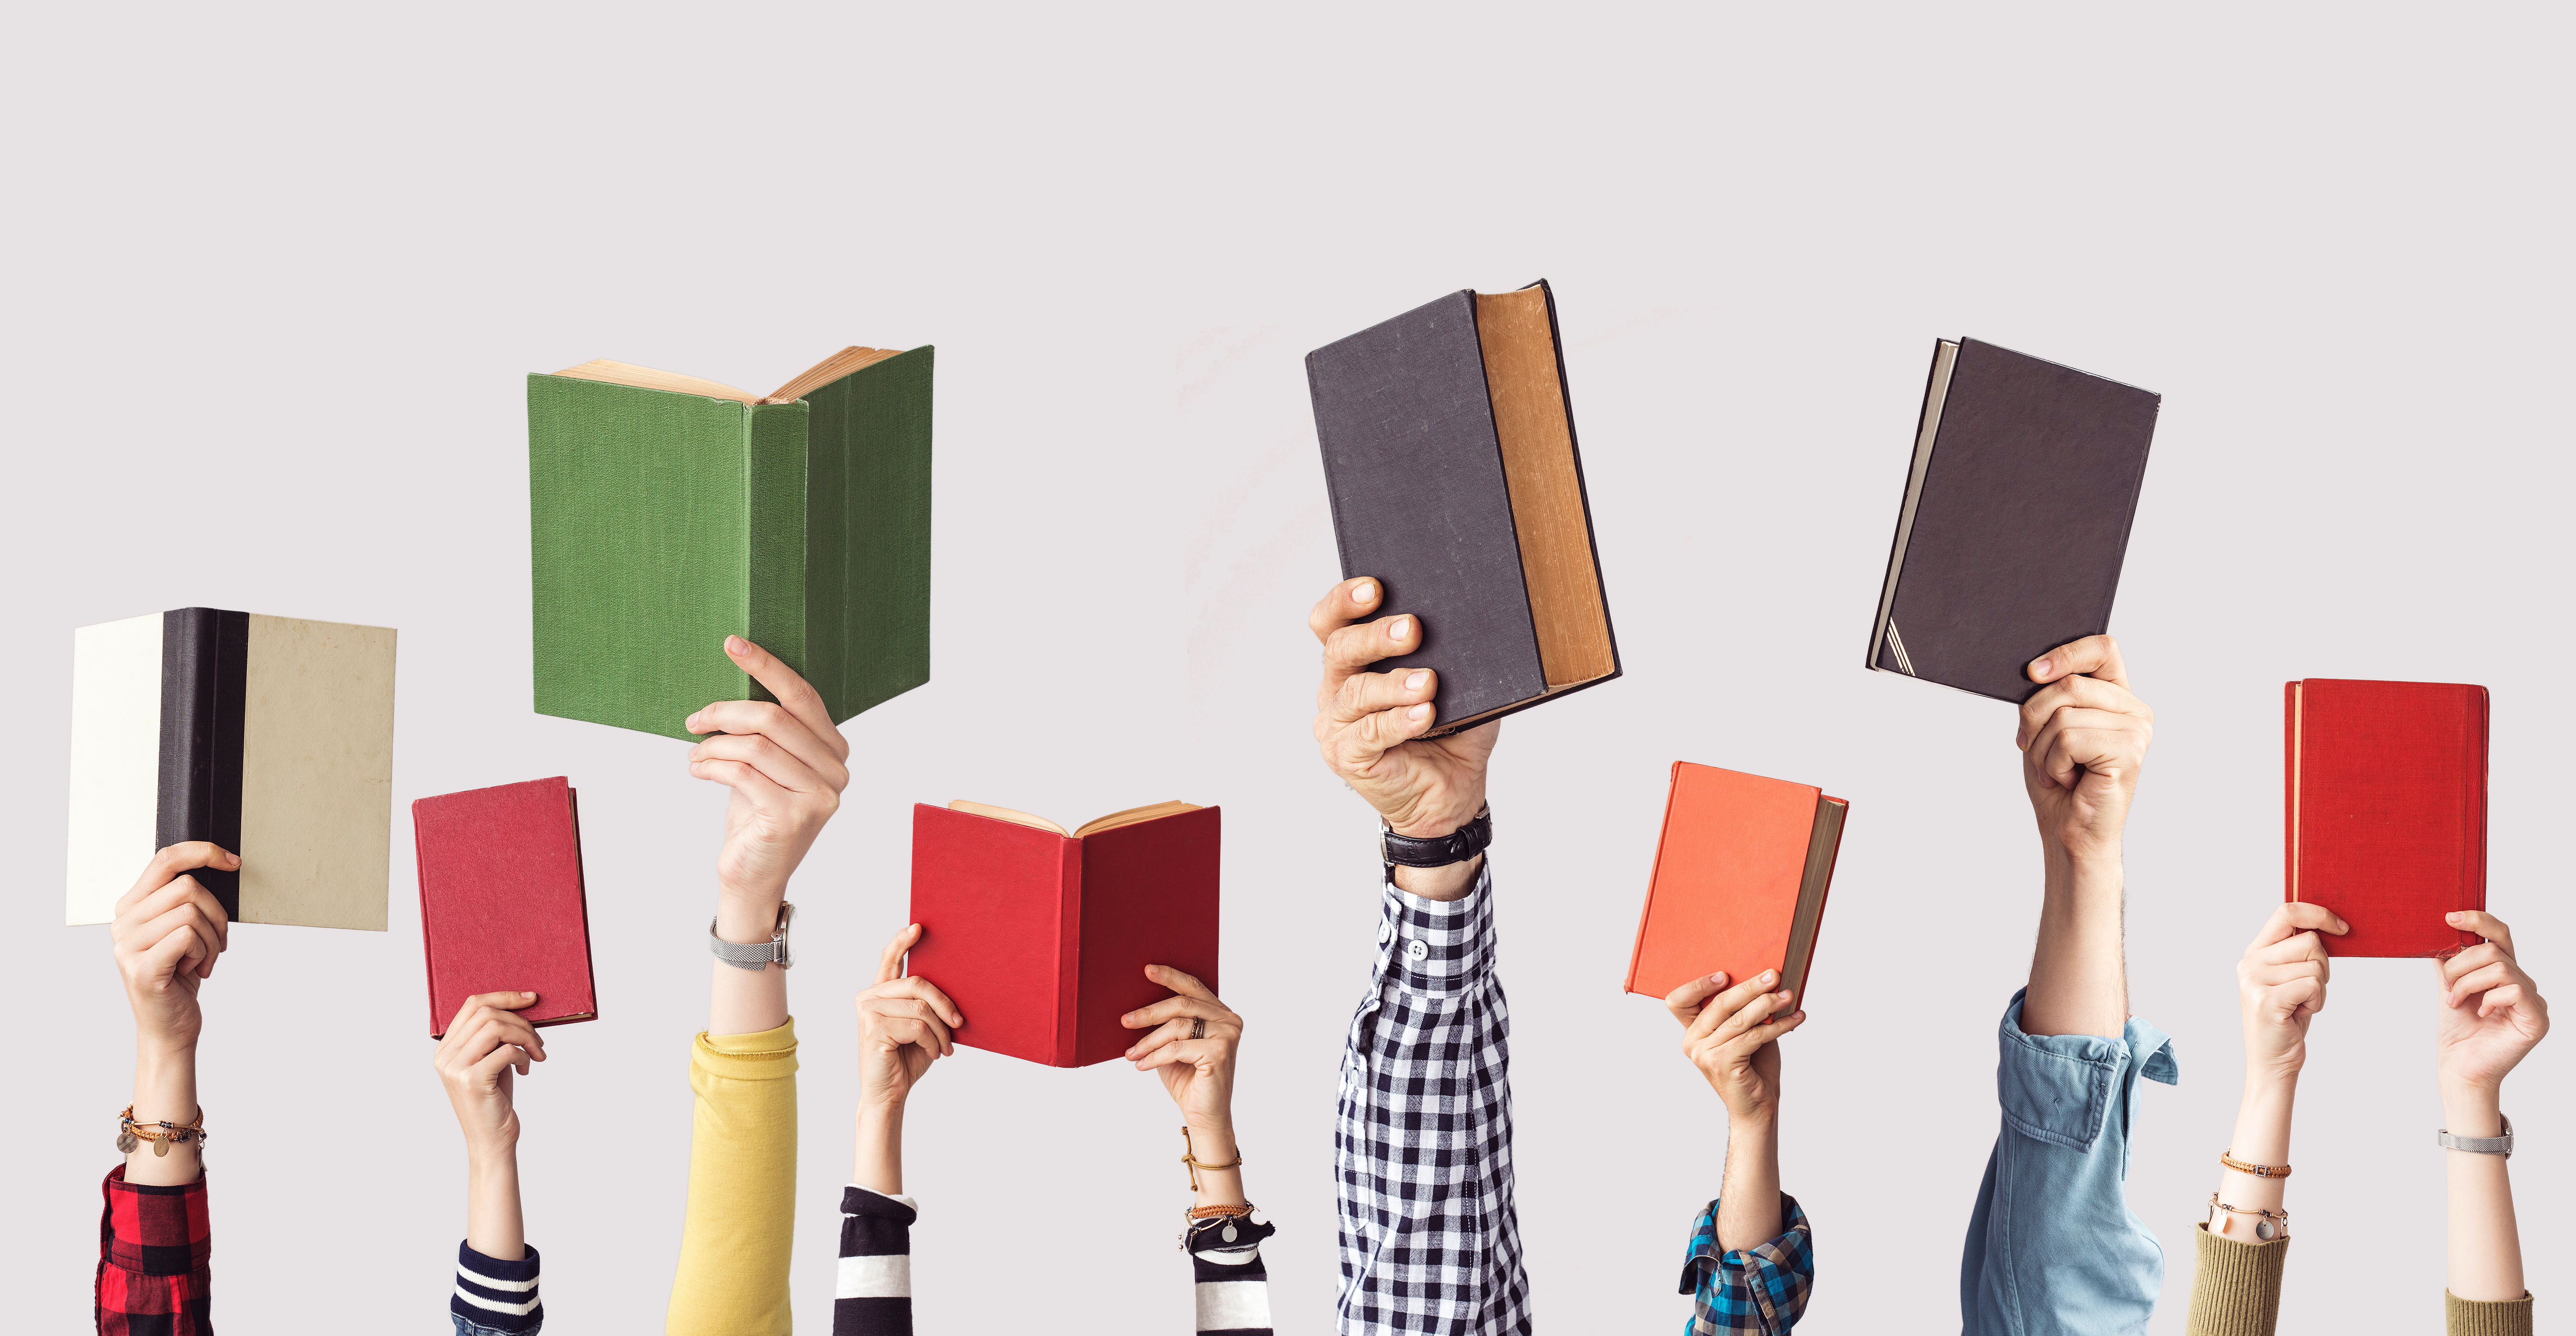 8 books being held up by people's hands